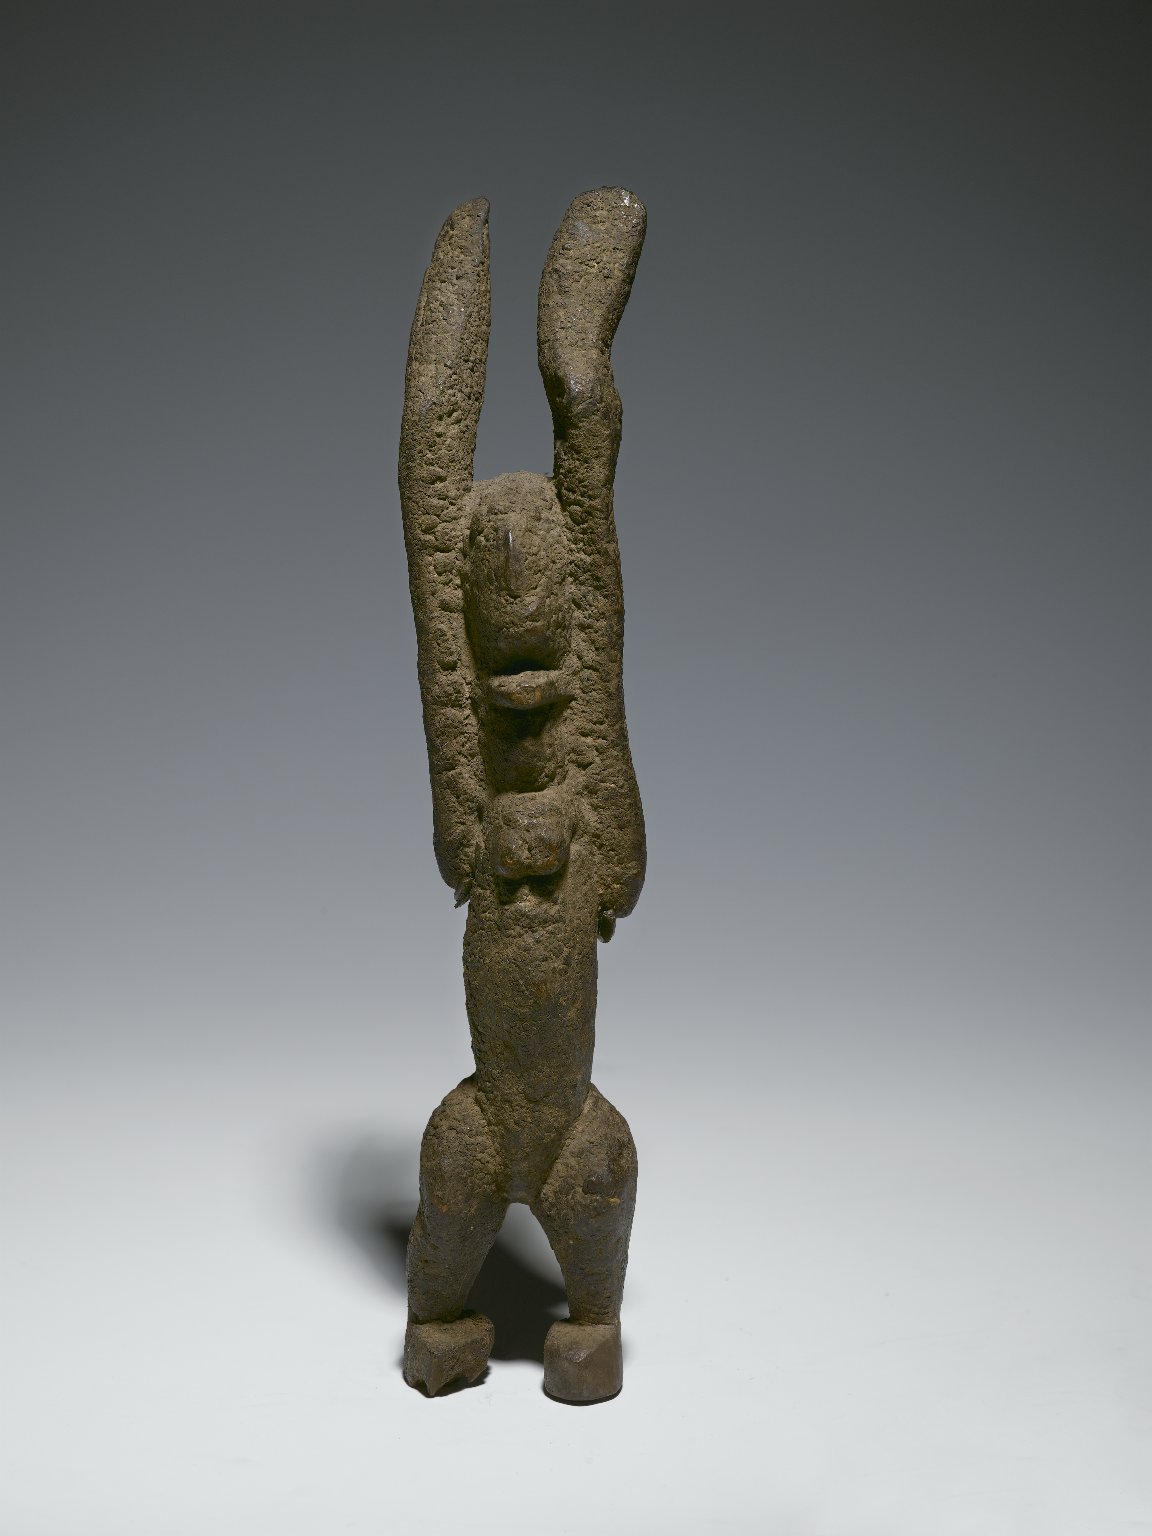 Brooklyn_Museum_1989.51.39_Nommo_Figure_with_Raised_Arms.jpg